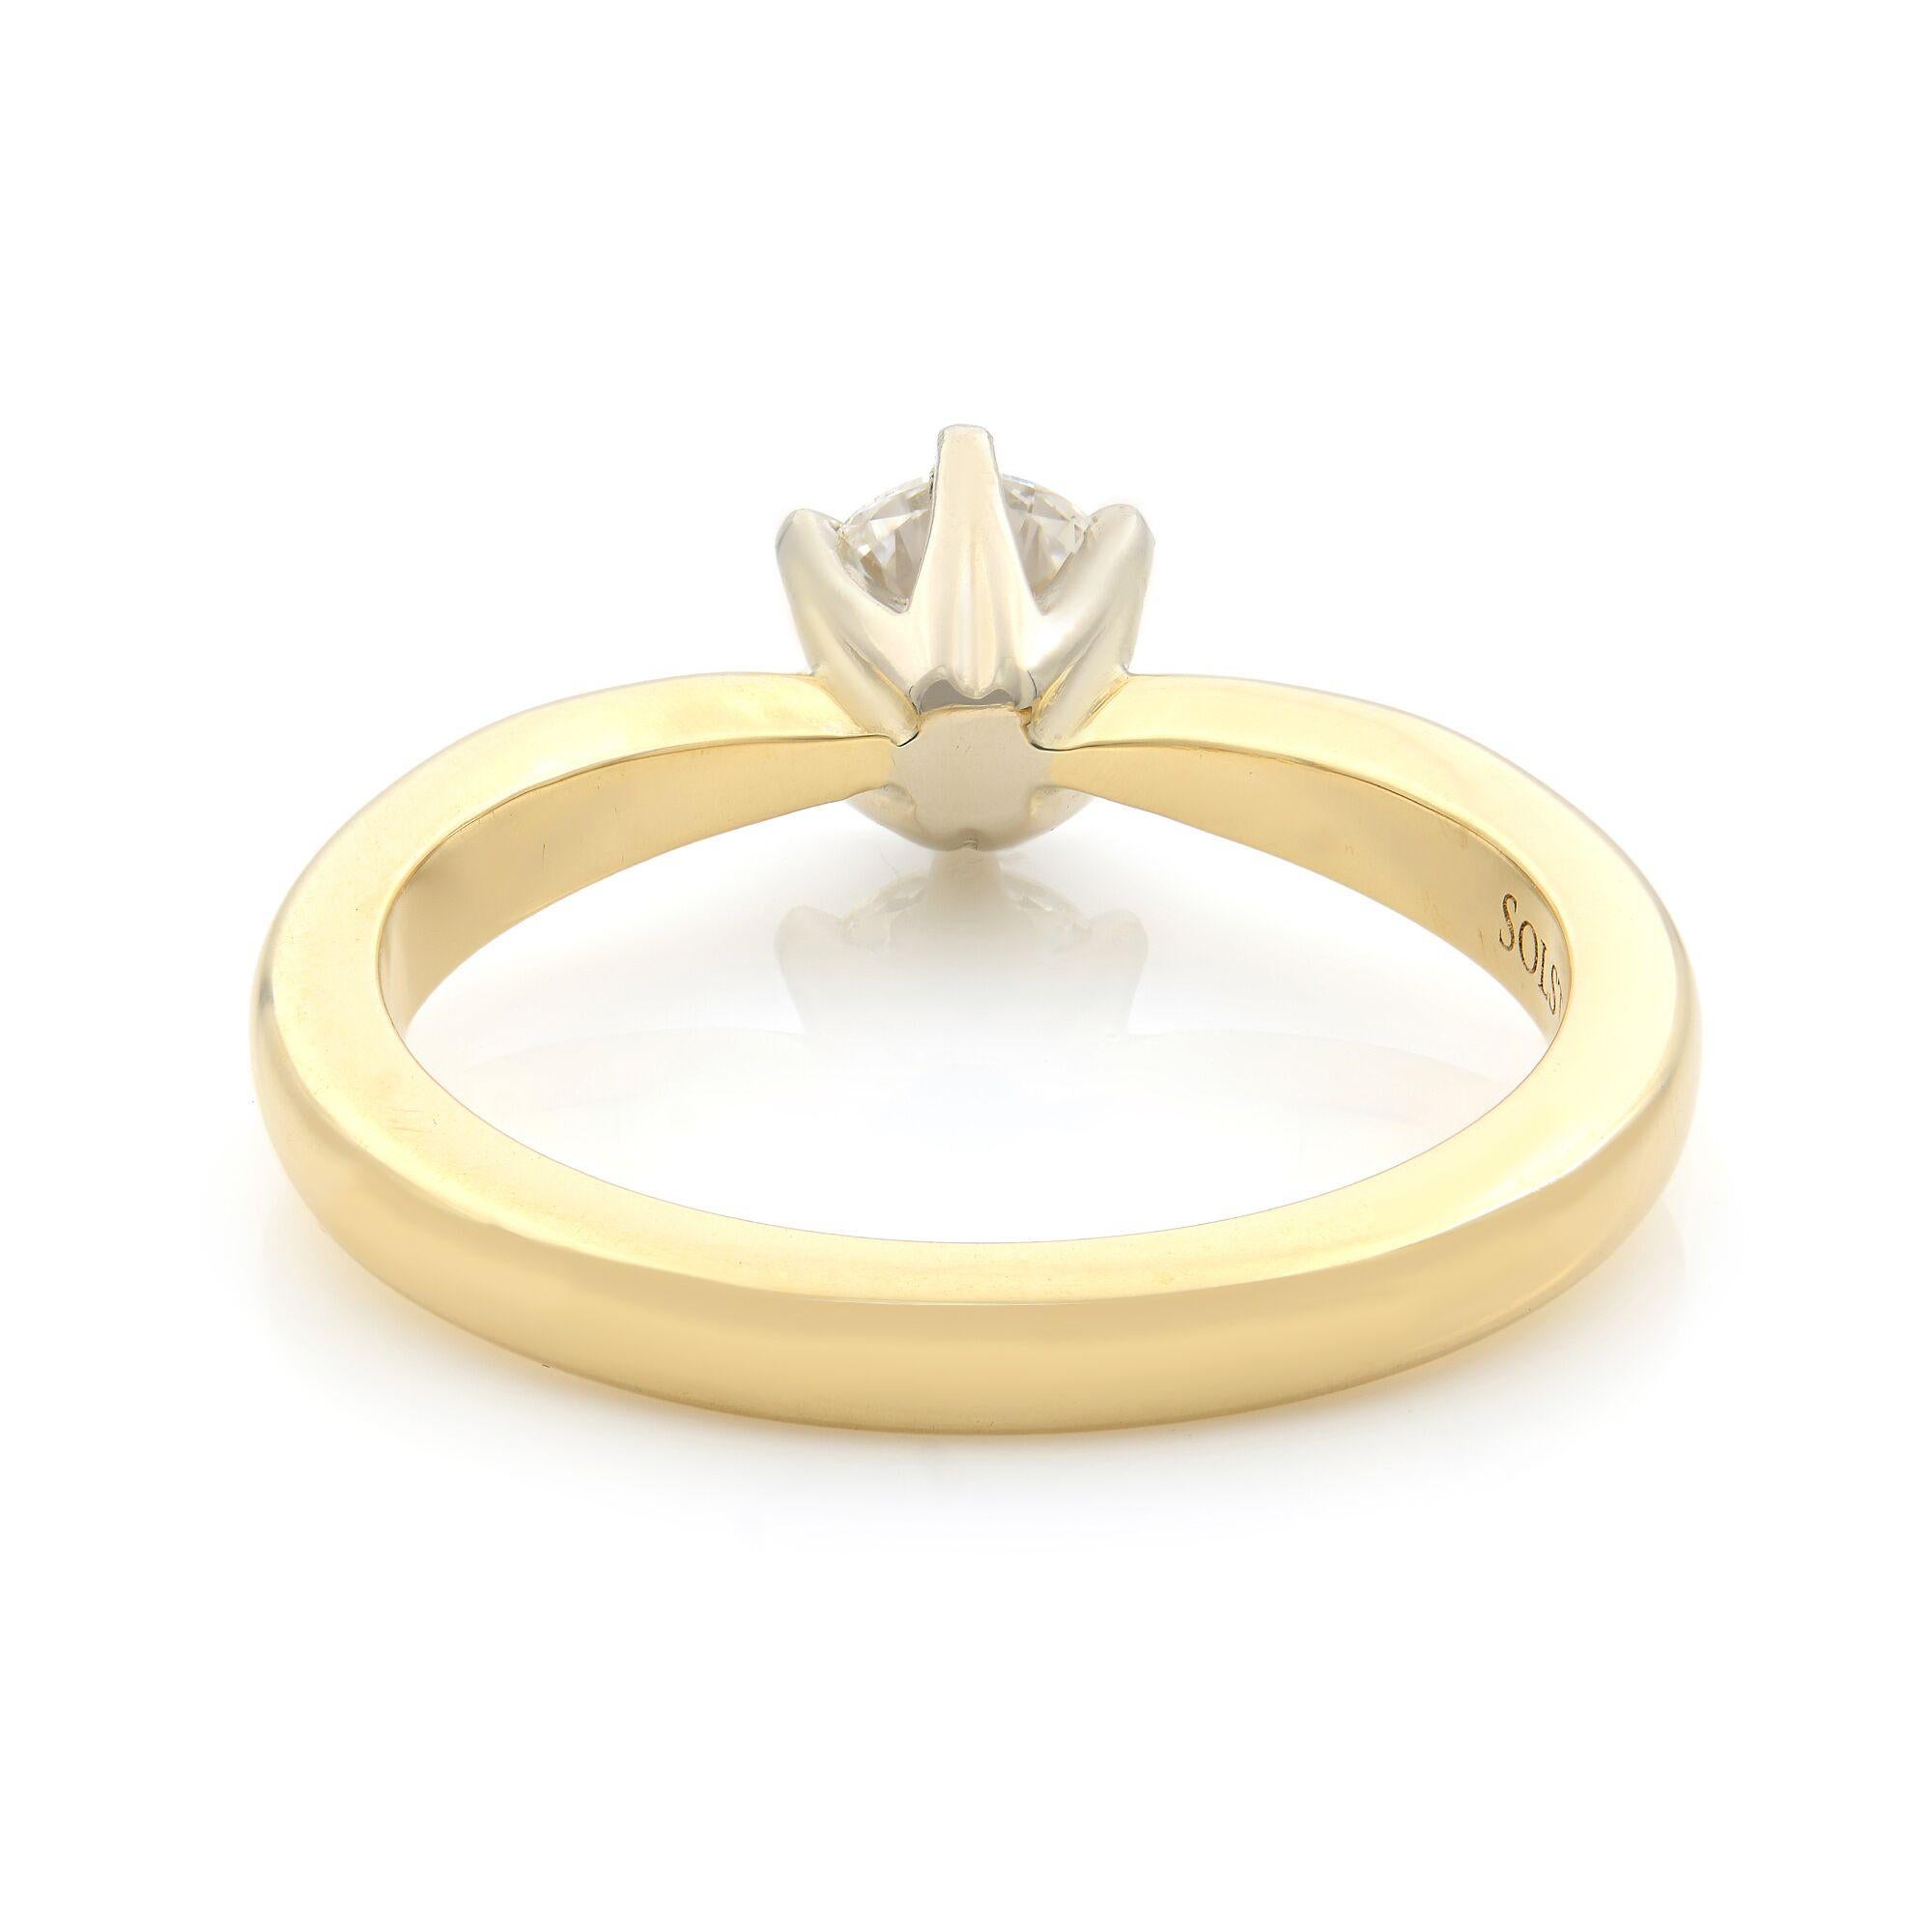 Rachel Koen Diamond Solitaire Engagement Ring 14K Yellow Gold 0.70Cttw In New Condition For Sale In New York, NY